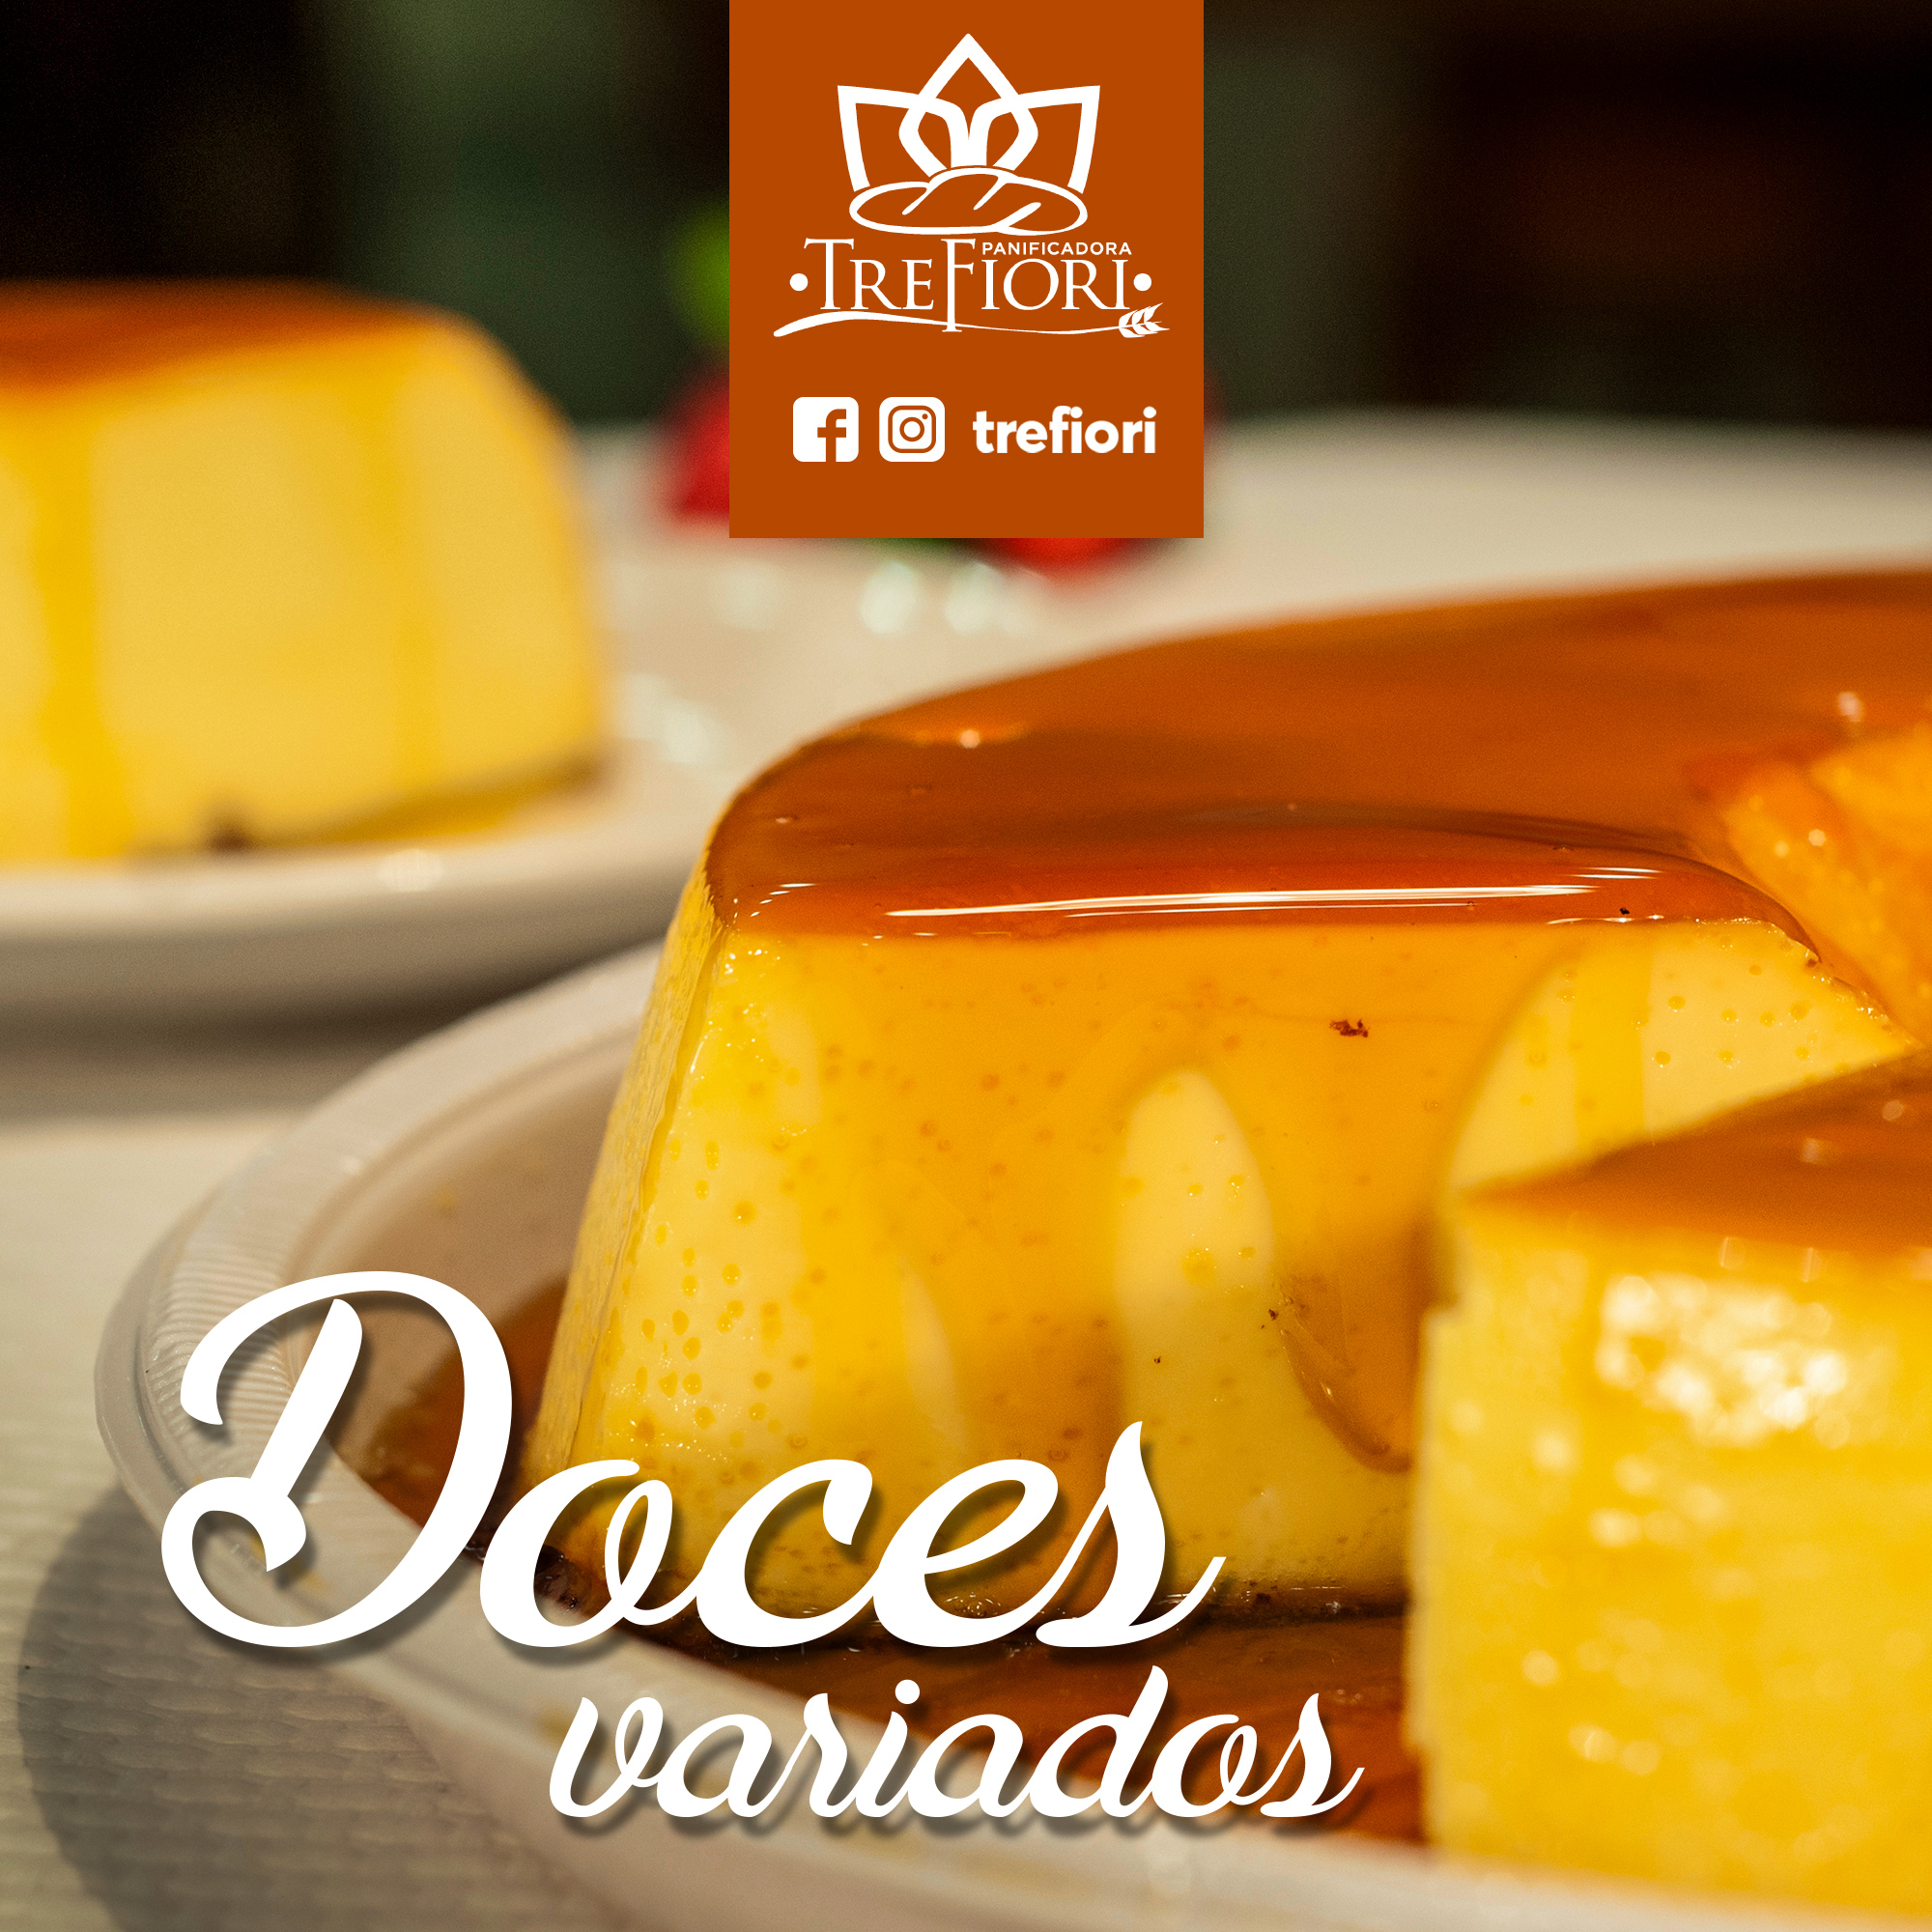 Post_doces_01